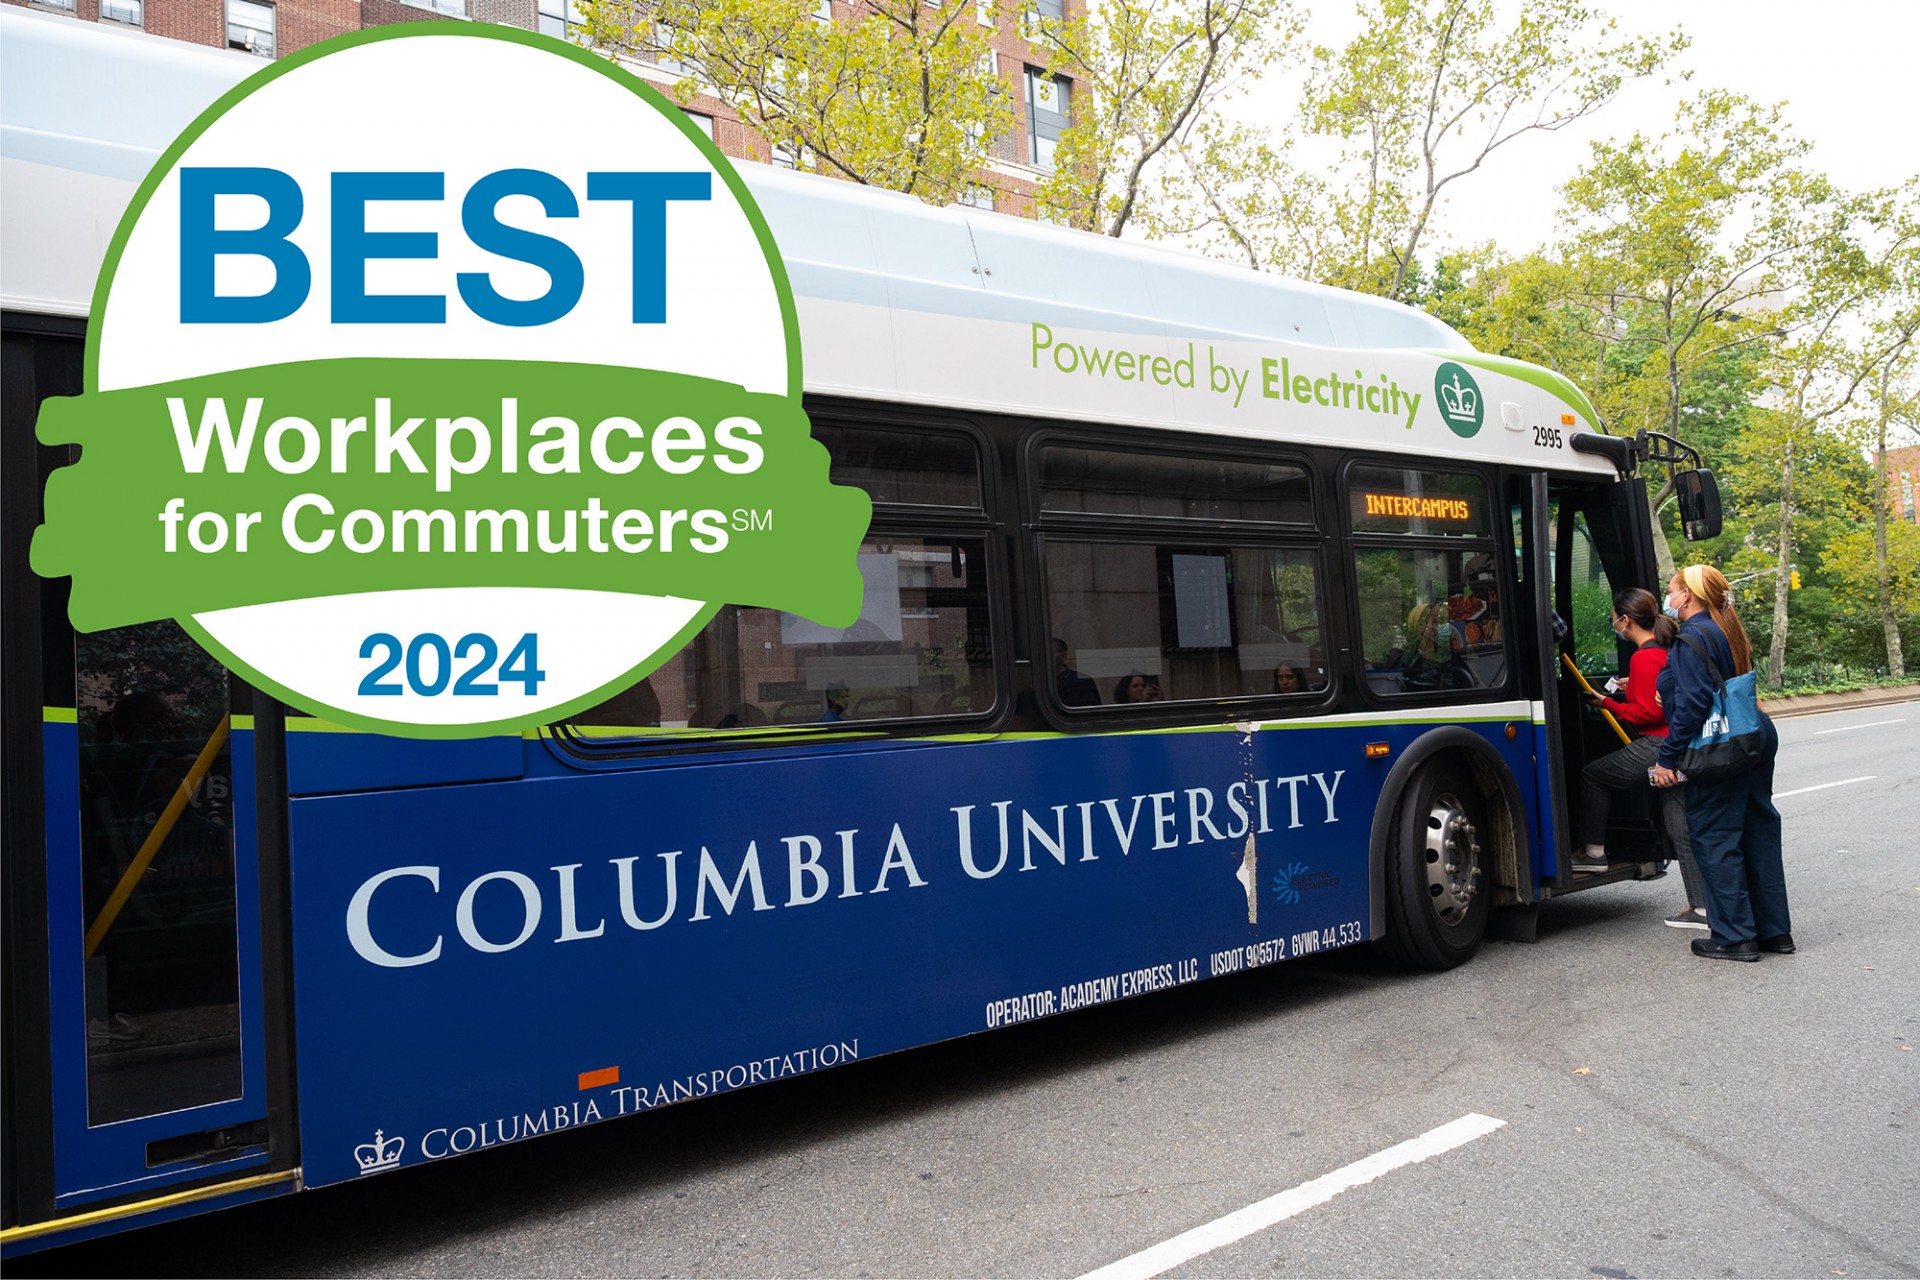 Best Workplaces for Commuters 2024 logo over an image of the Columbia University shuttle bus picking up passengers at a Manhattan bus stop